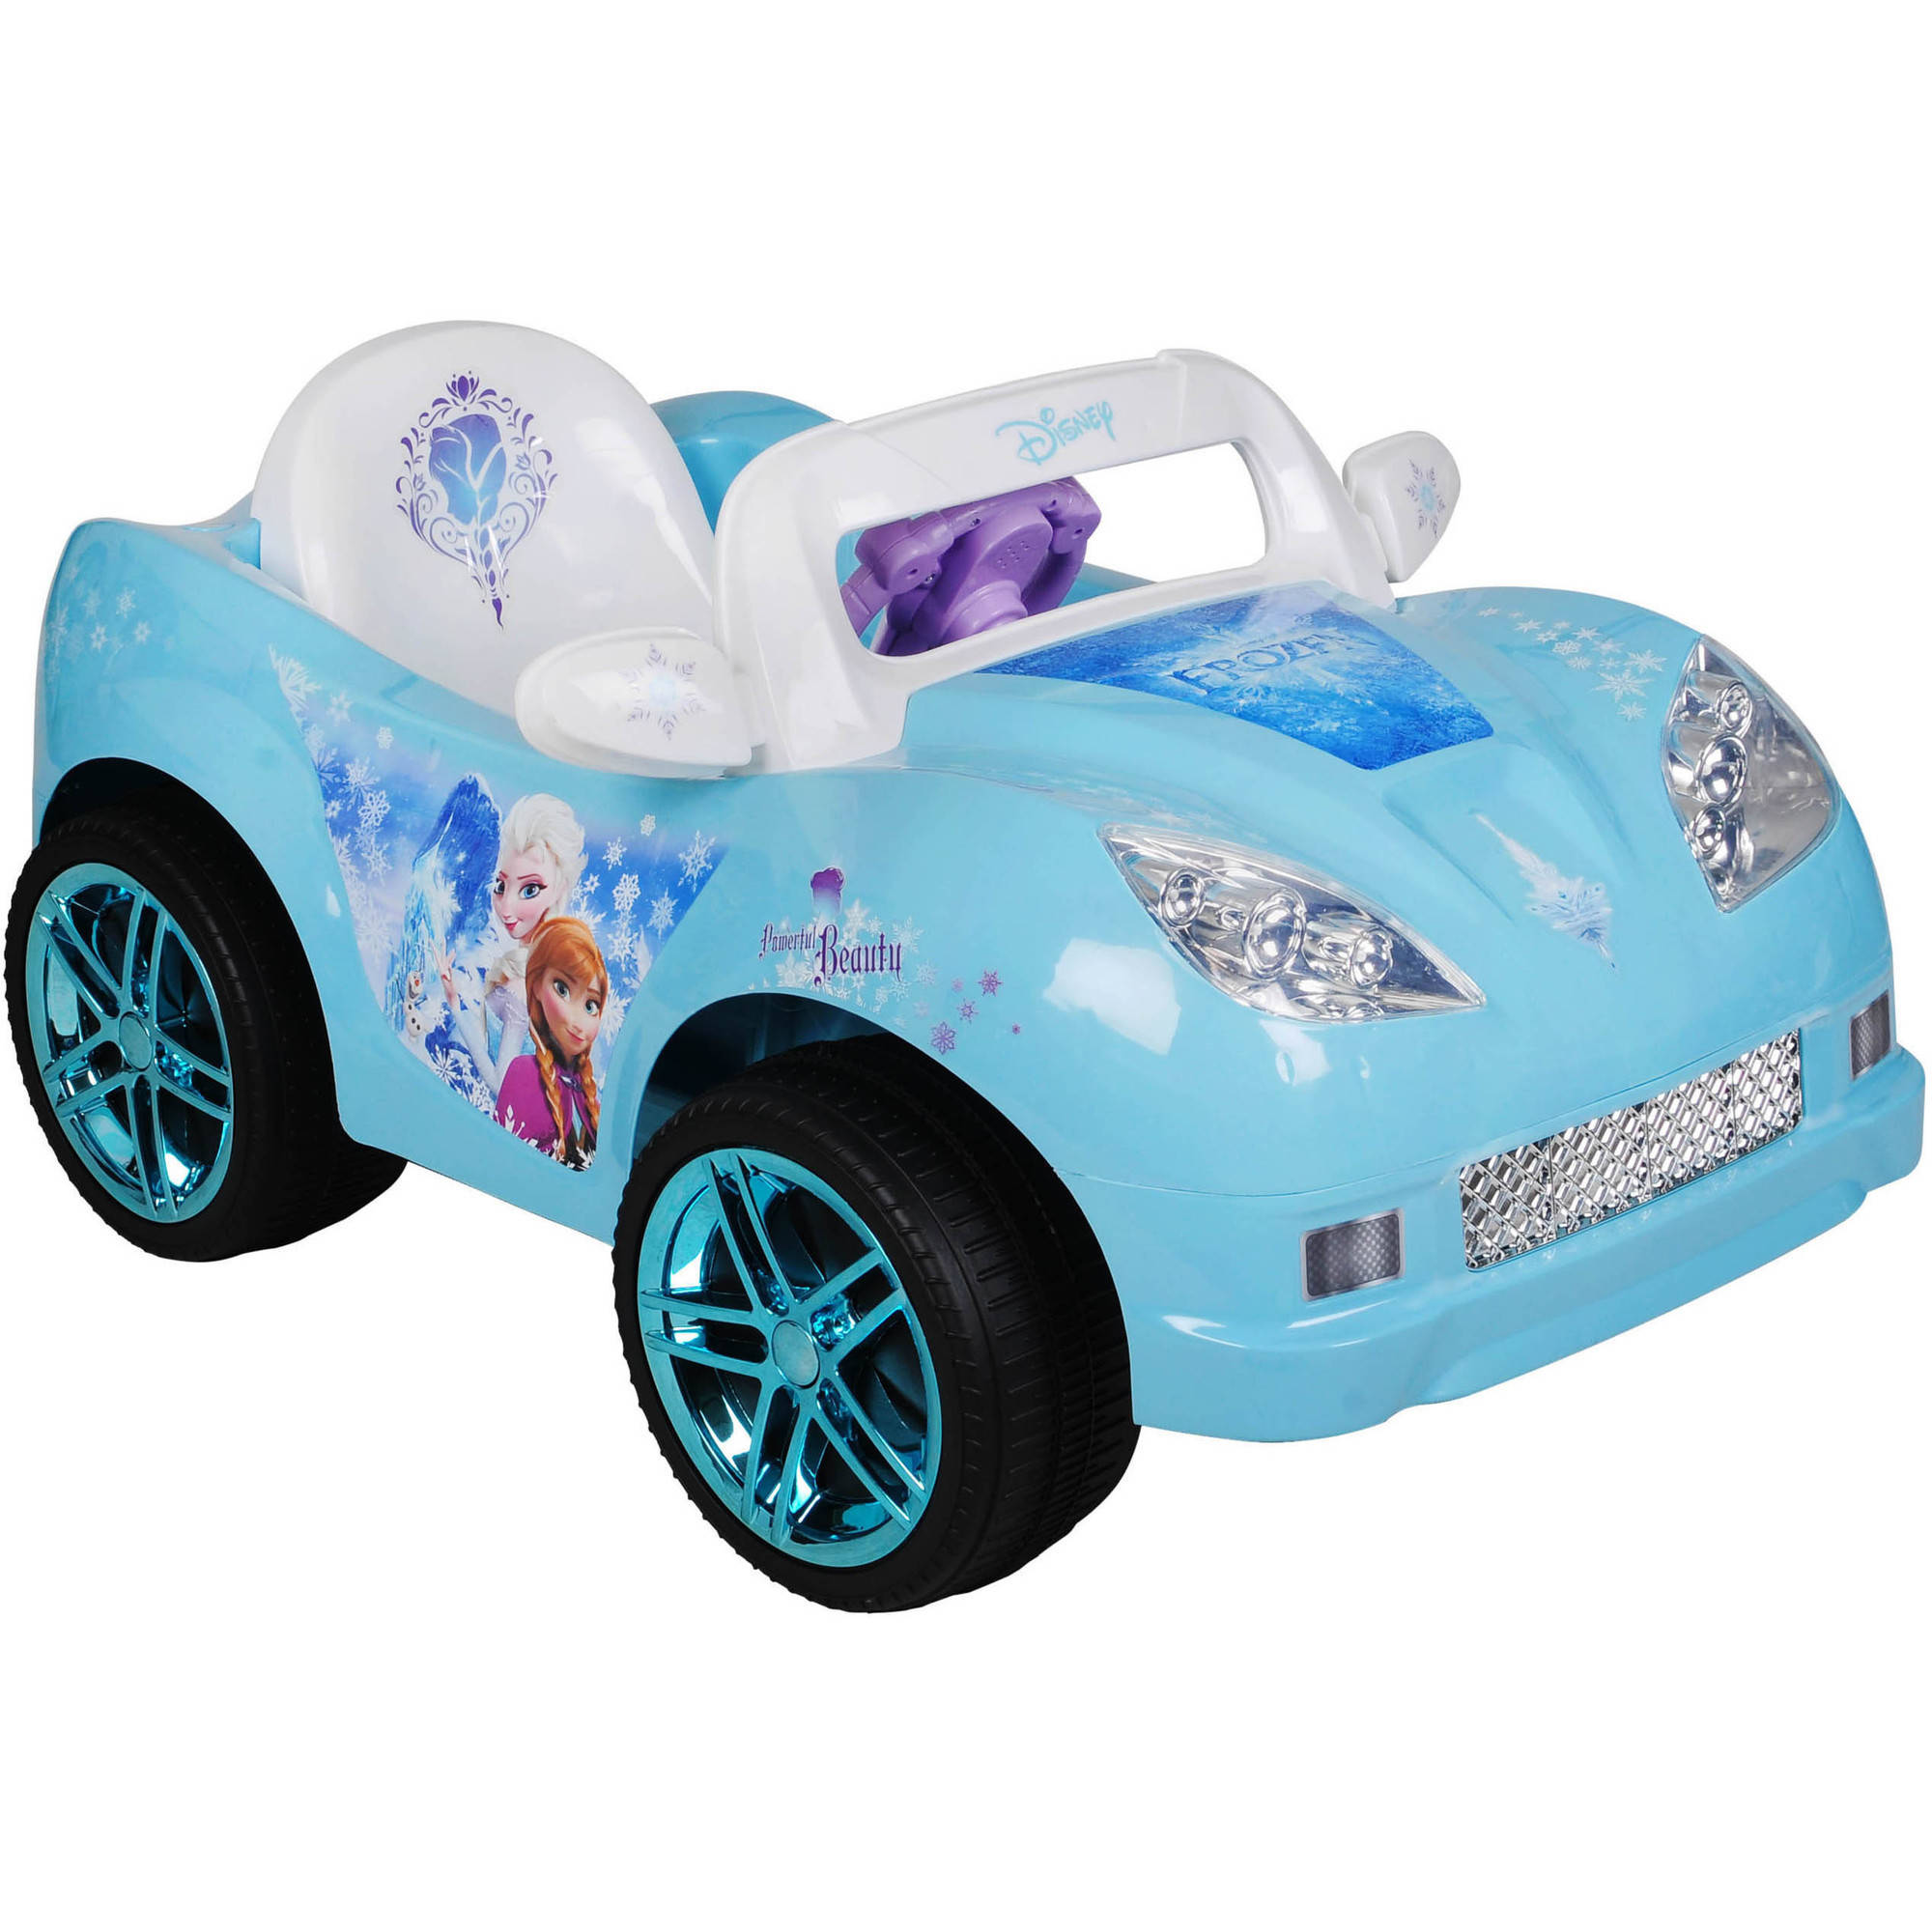 Disney Frozen Convertible Car 6-Volt Battery-Powered Ride-On - image 2 of 7